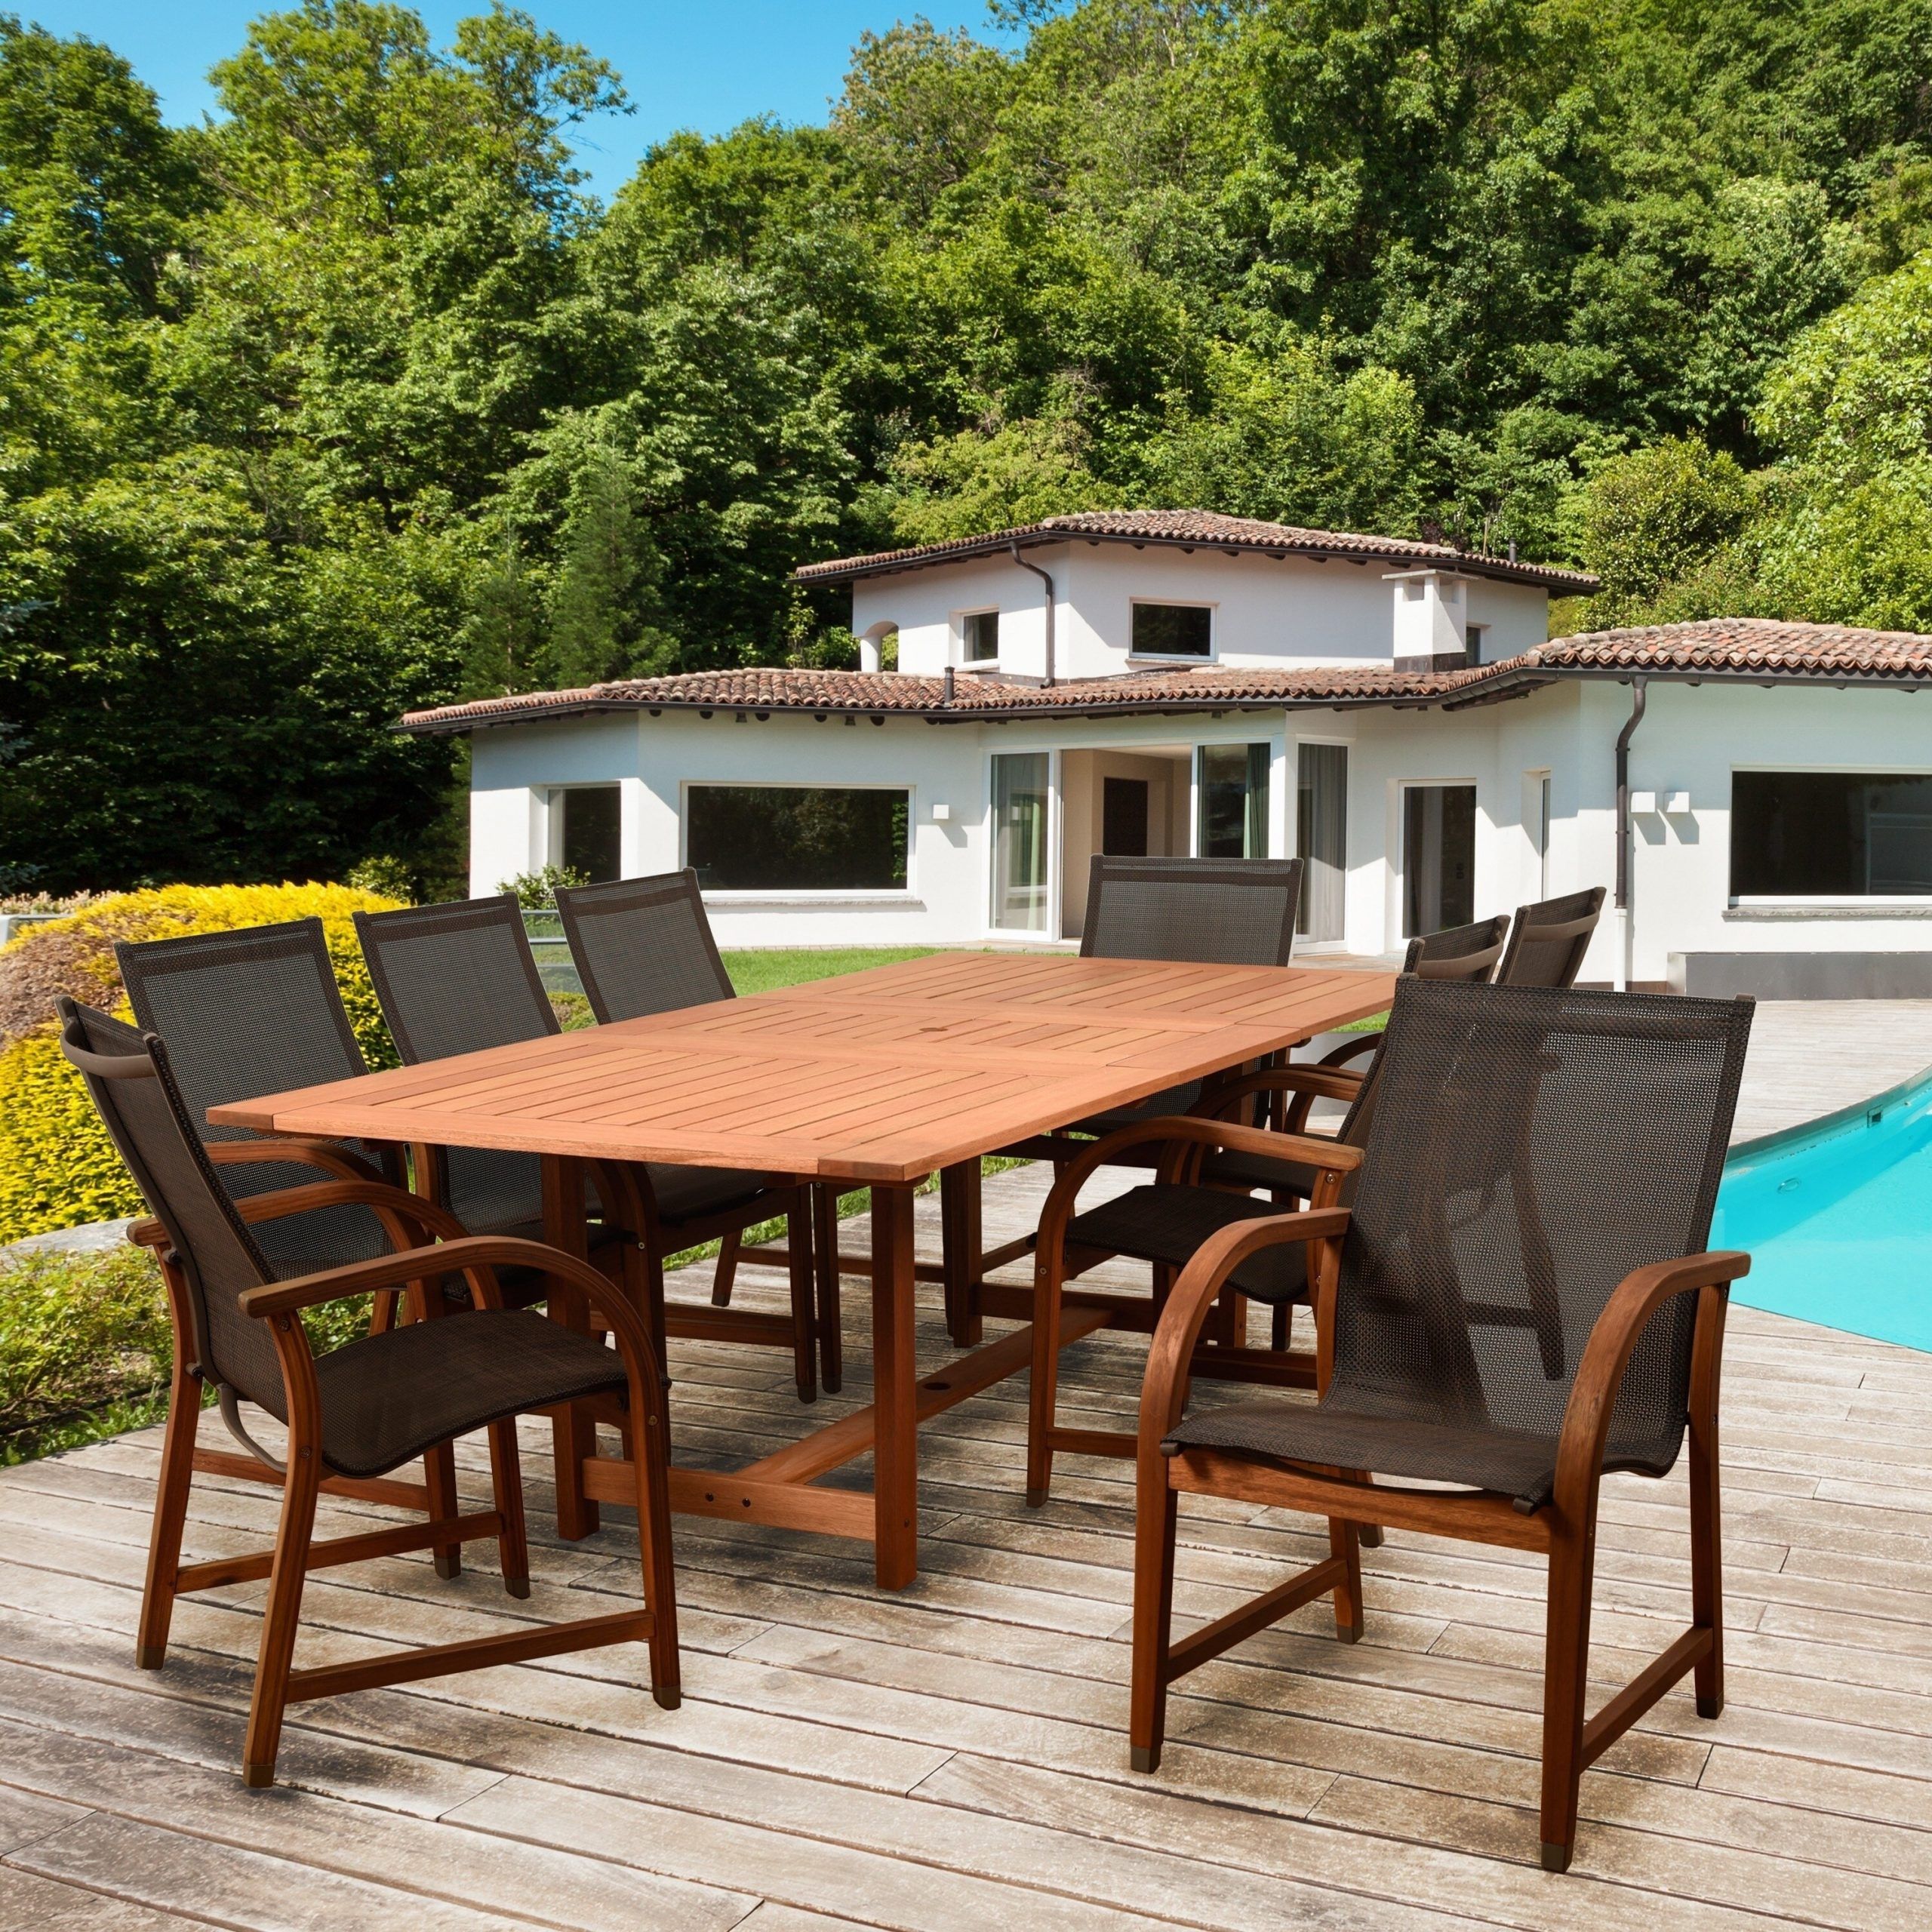 Amazonia Cosmopolitan Brown 9 Piece Rectangular Patio Dining Set Pertaining To Brown 9 Piece Outdoor Dining Sets (View 2 of 15)